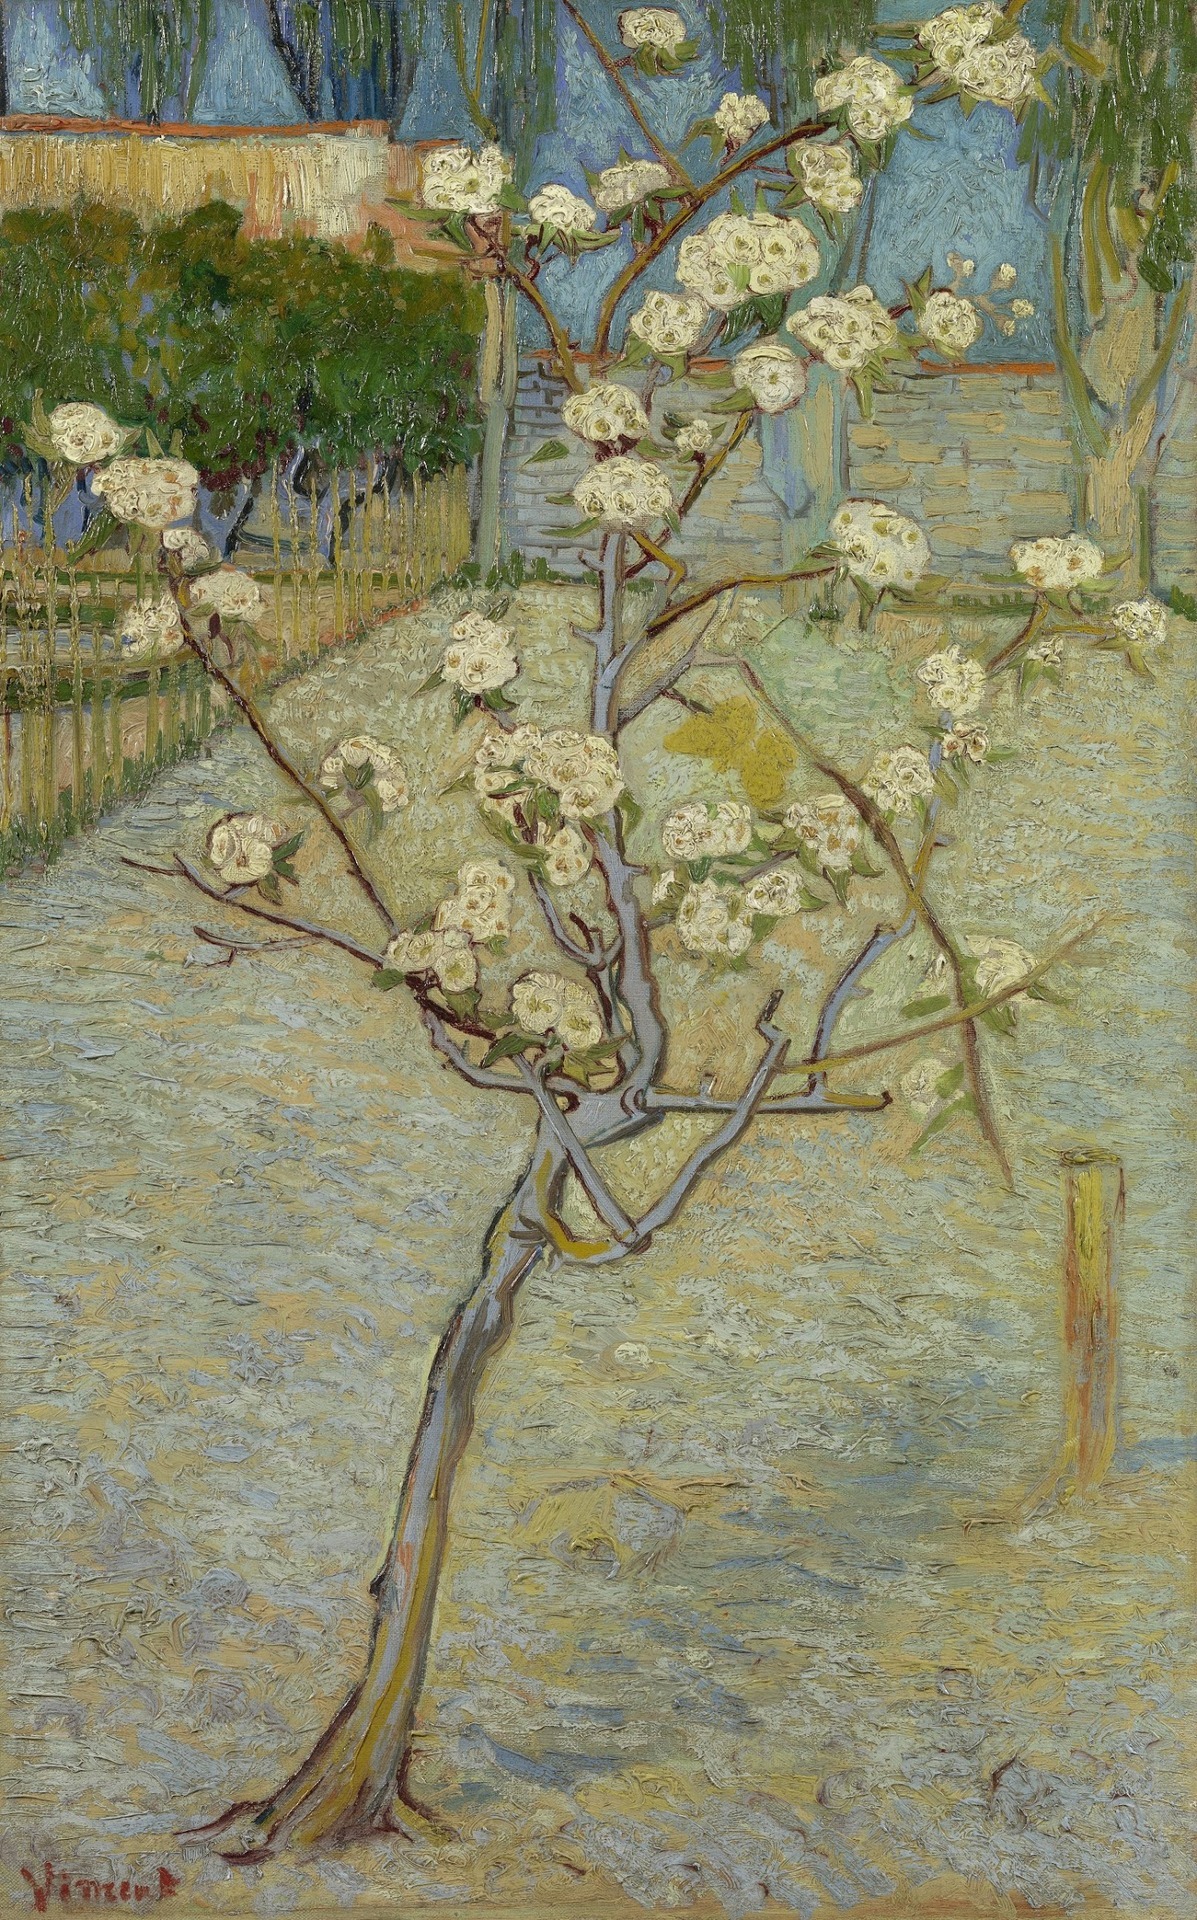 Vincent van Gogh (1853-1890), Small Pear Tree in Blossom (1888); oil on canvas, 73